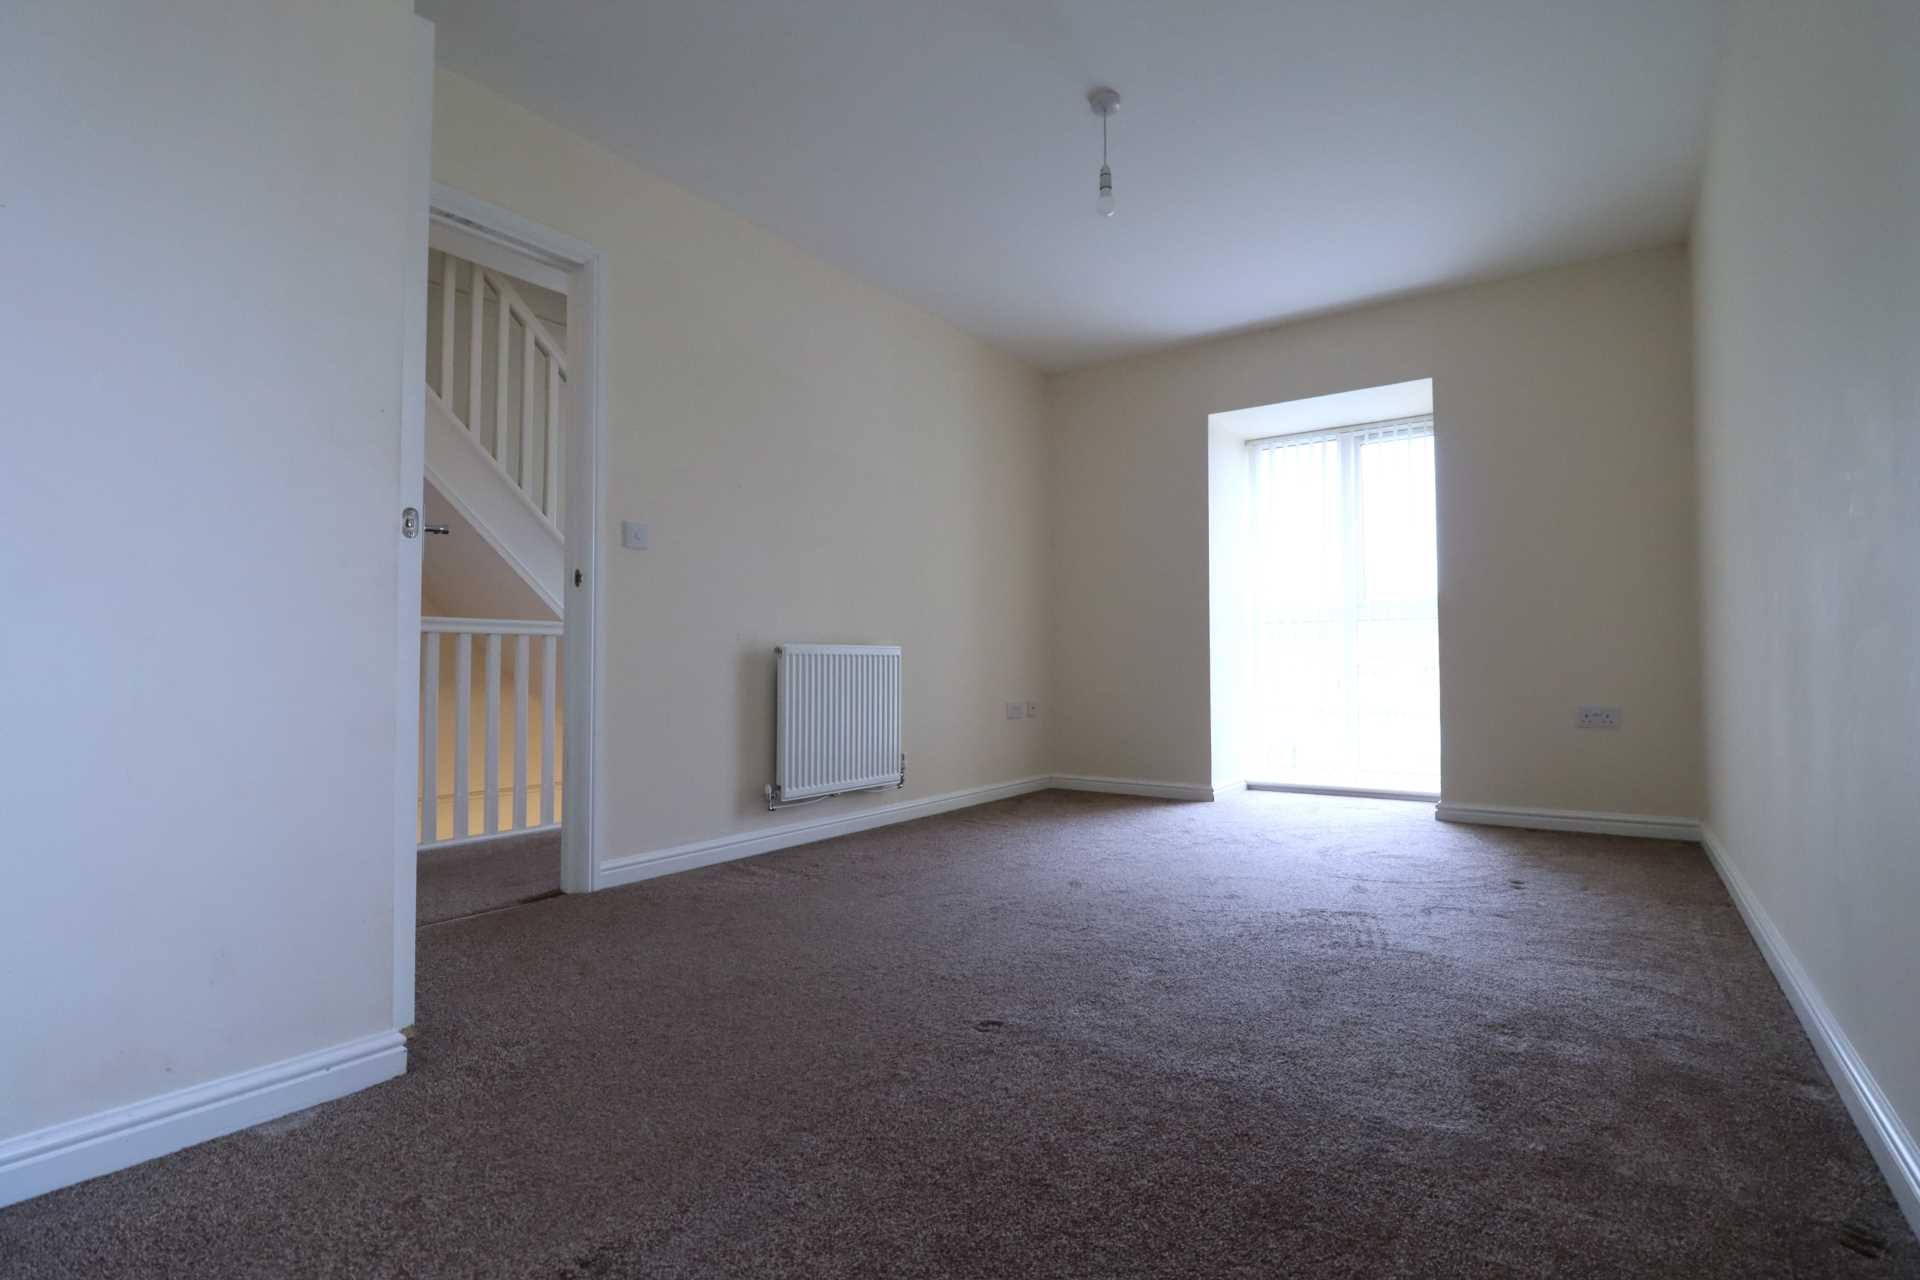 Haywood Village - Vacant - 4 Bedroom Town House, Image 12